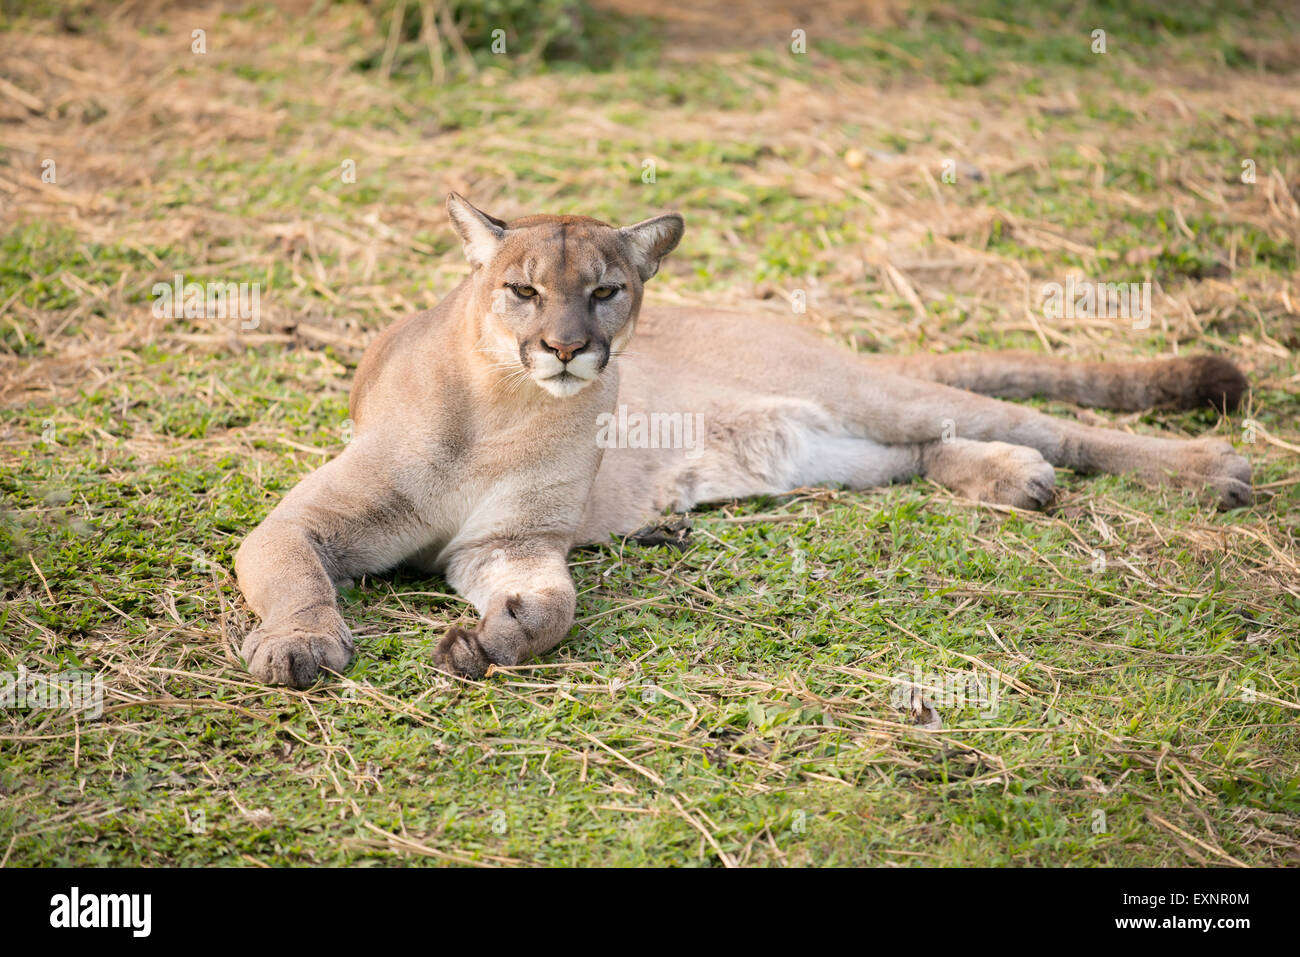 puma or cougar in zoo Stock Photo